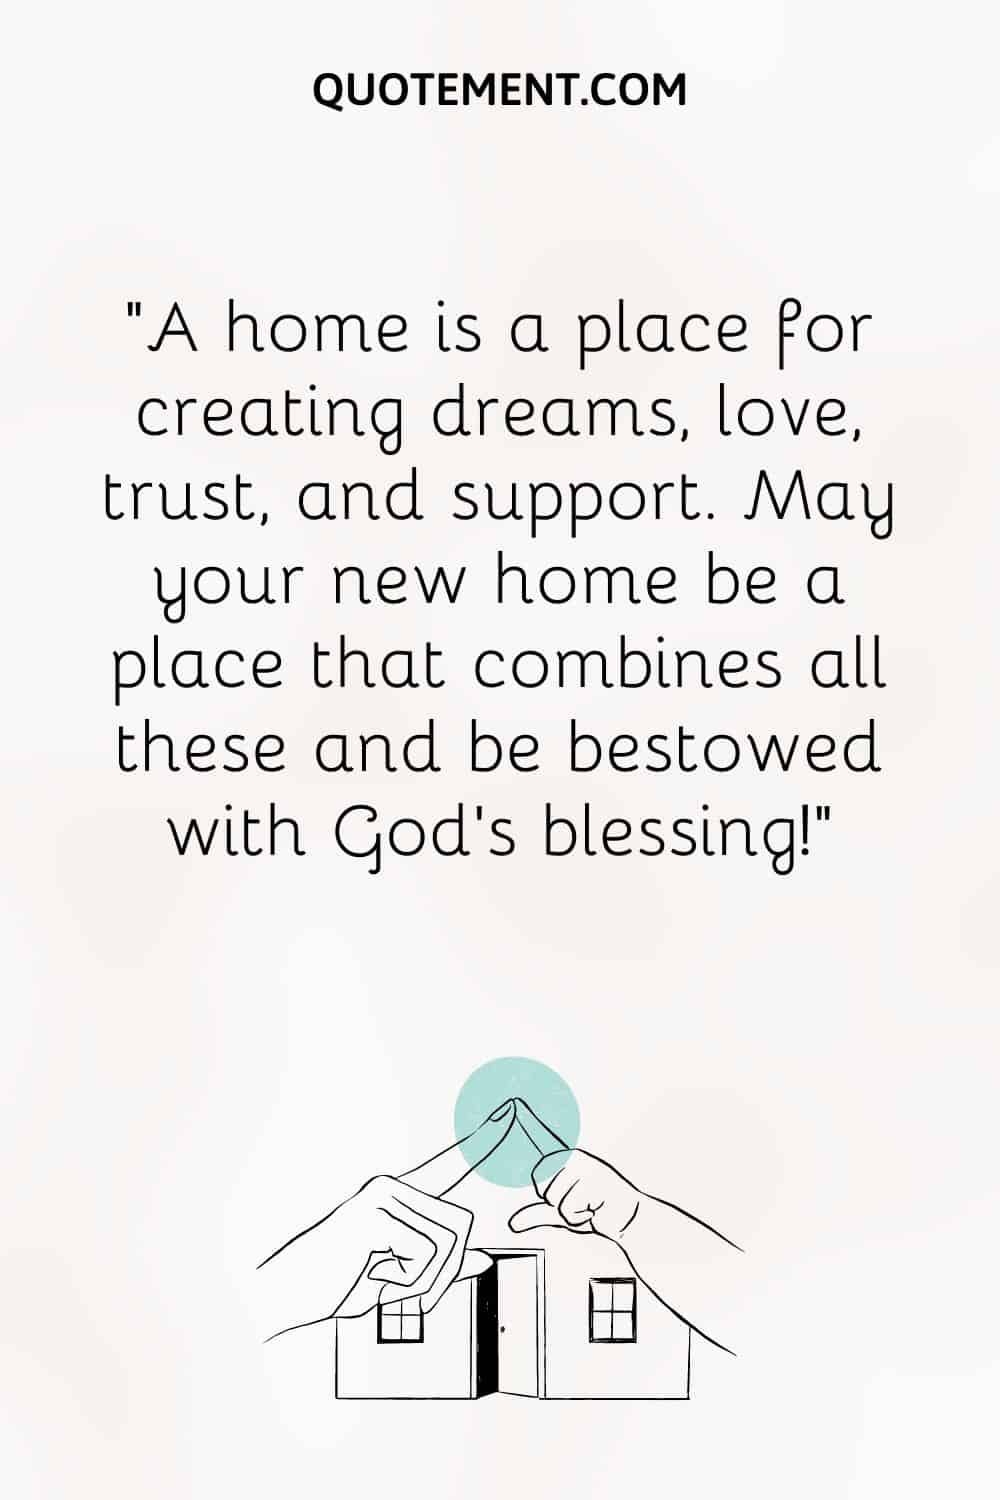 A home is a place for creating dreams, love, trust, and support.